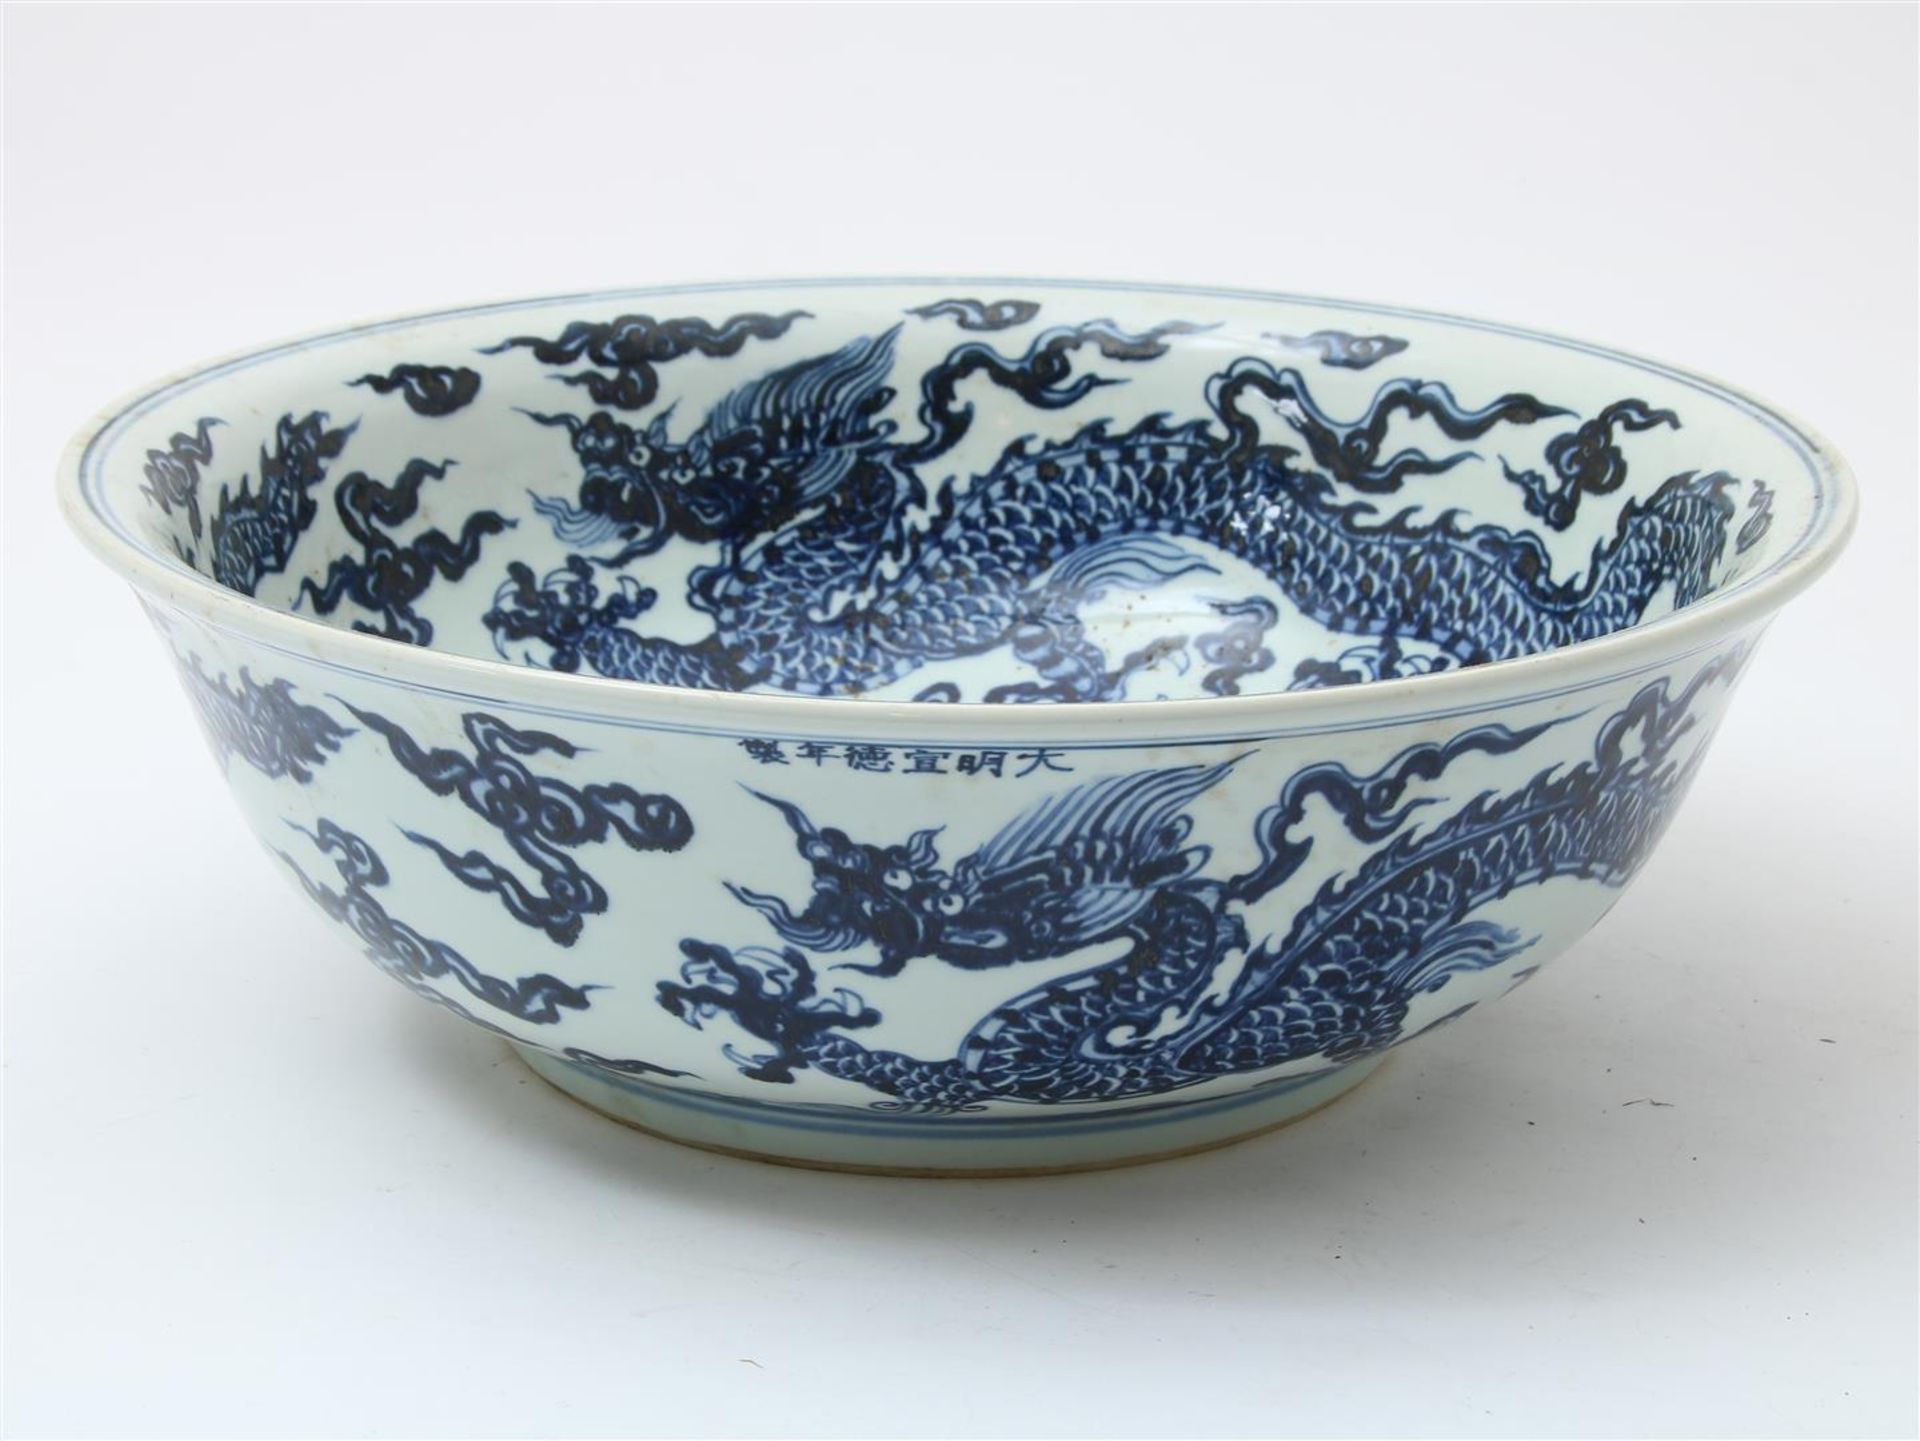 Porcelain bowl with decor of 5-toed dragons